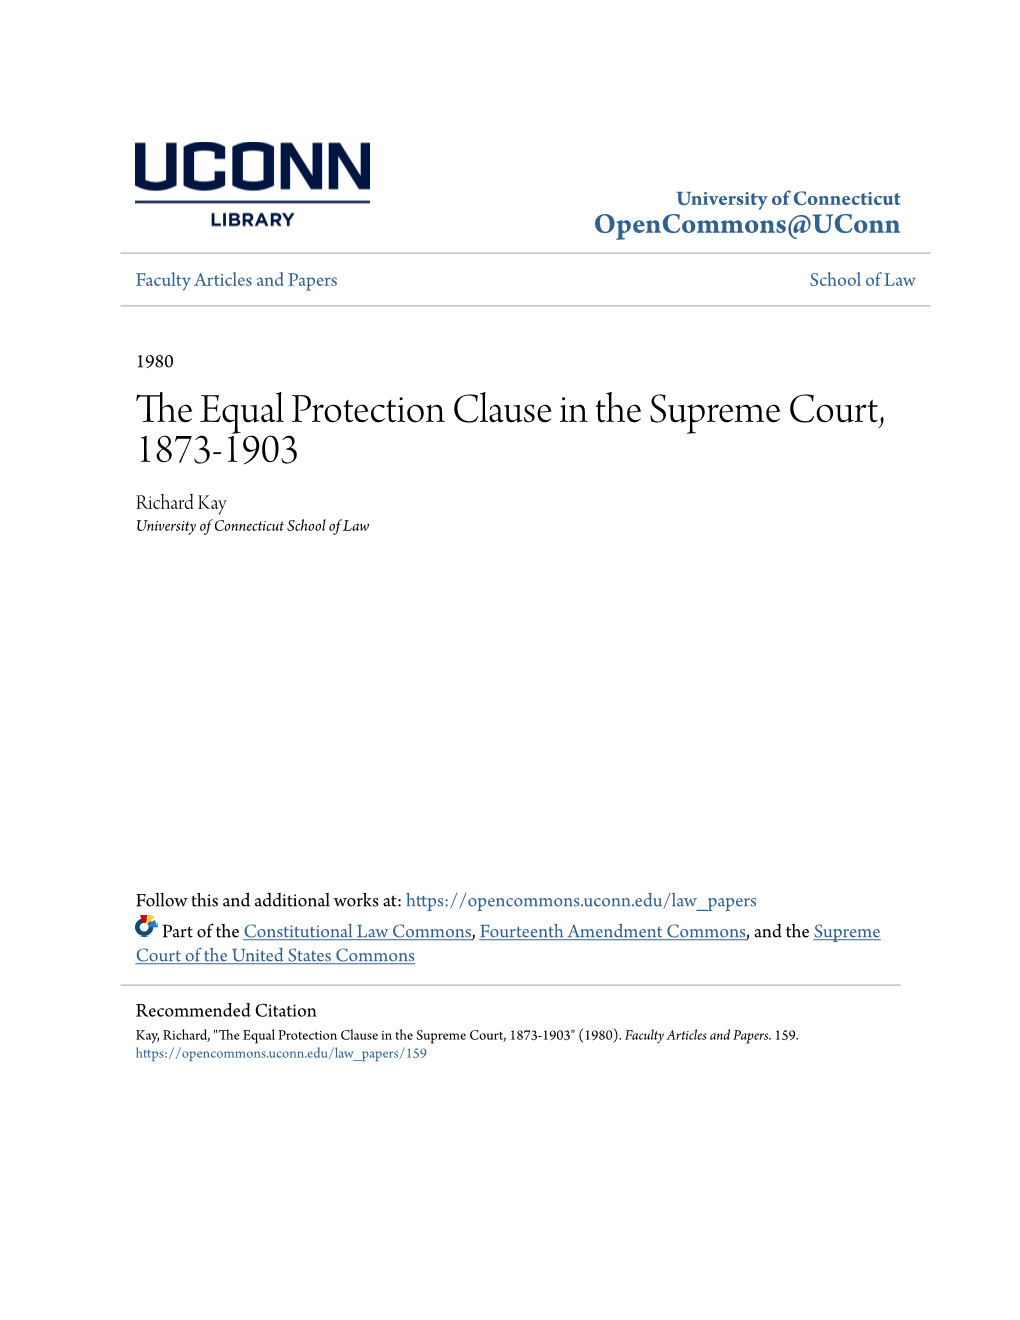 The Equal Protection Clause in the Supreme Court, 1873-1903